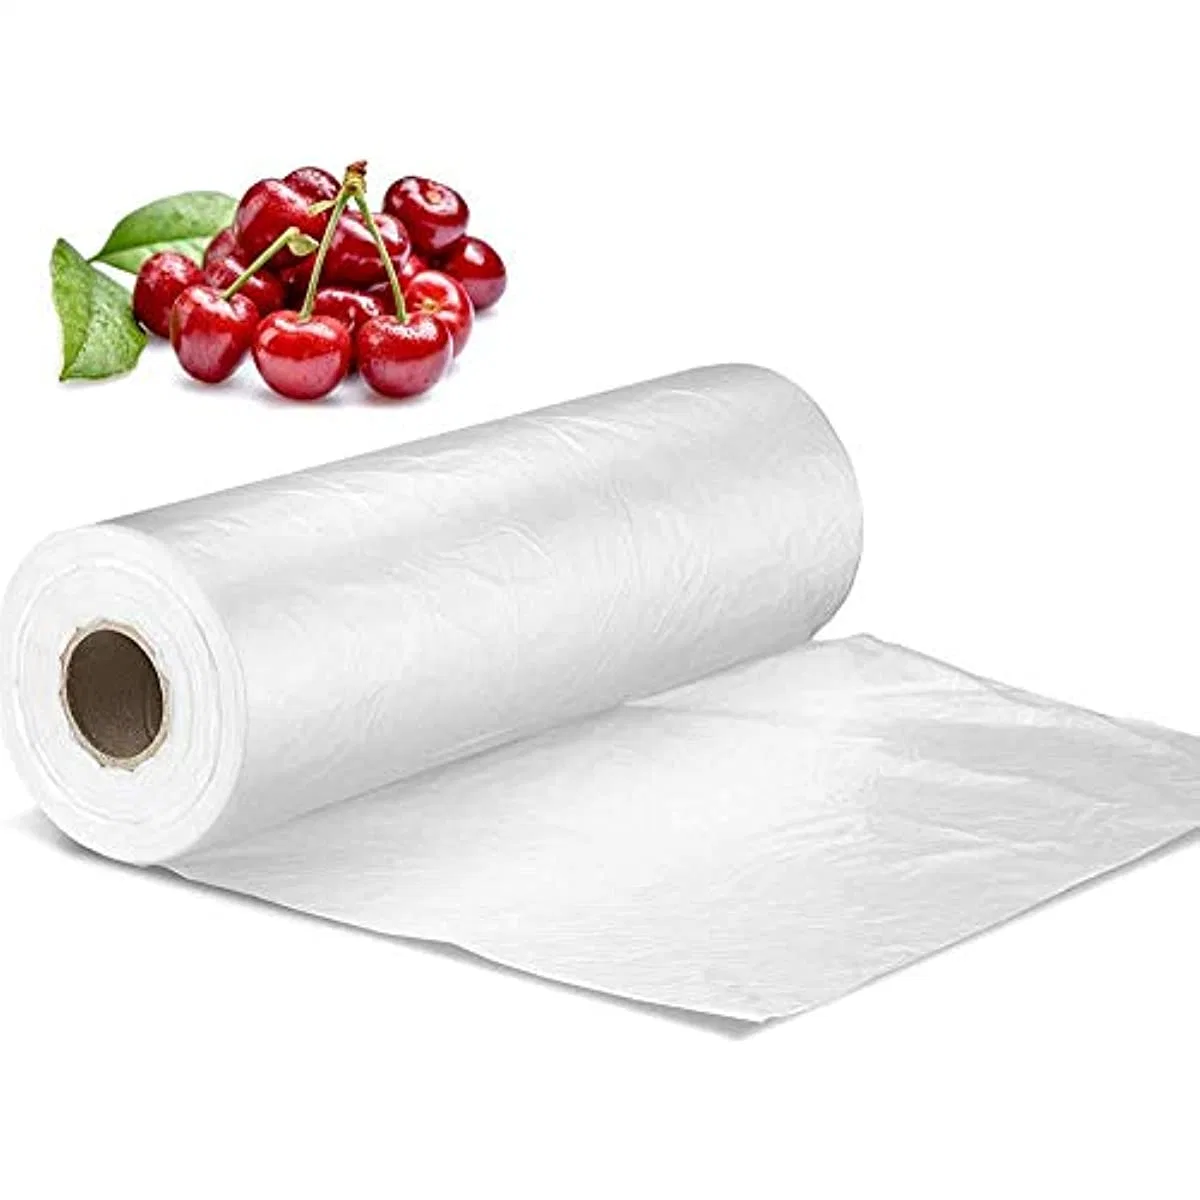 Plastic Produce Bag on a Roll, Clear Food Storage Bags for Bread Fruits Vegetable